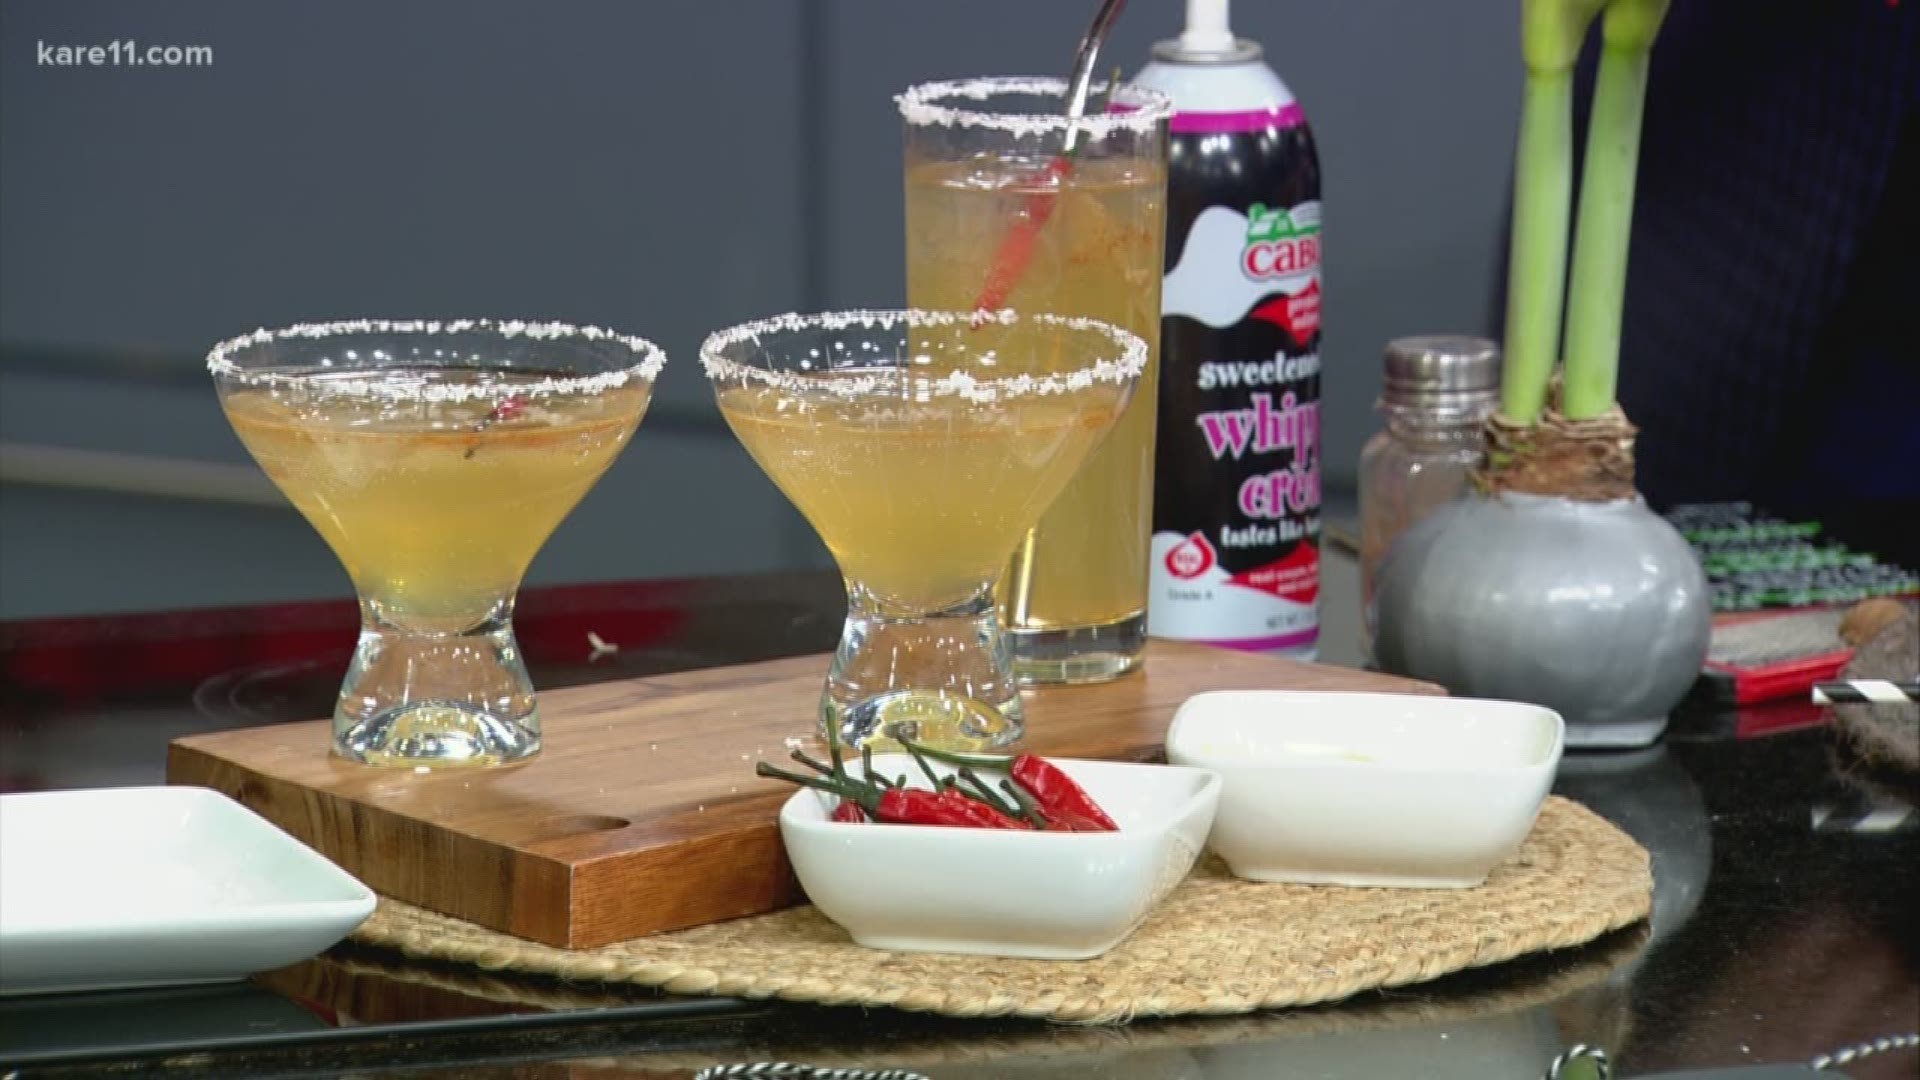 Tea based drinks are becoming the new frontier for alcohol free "cocktails."